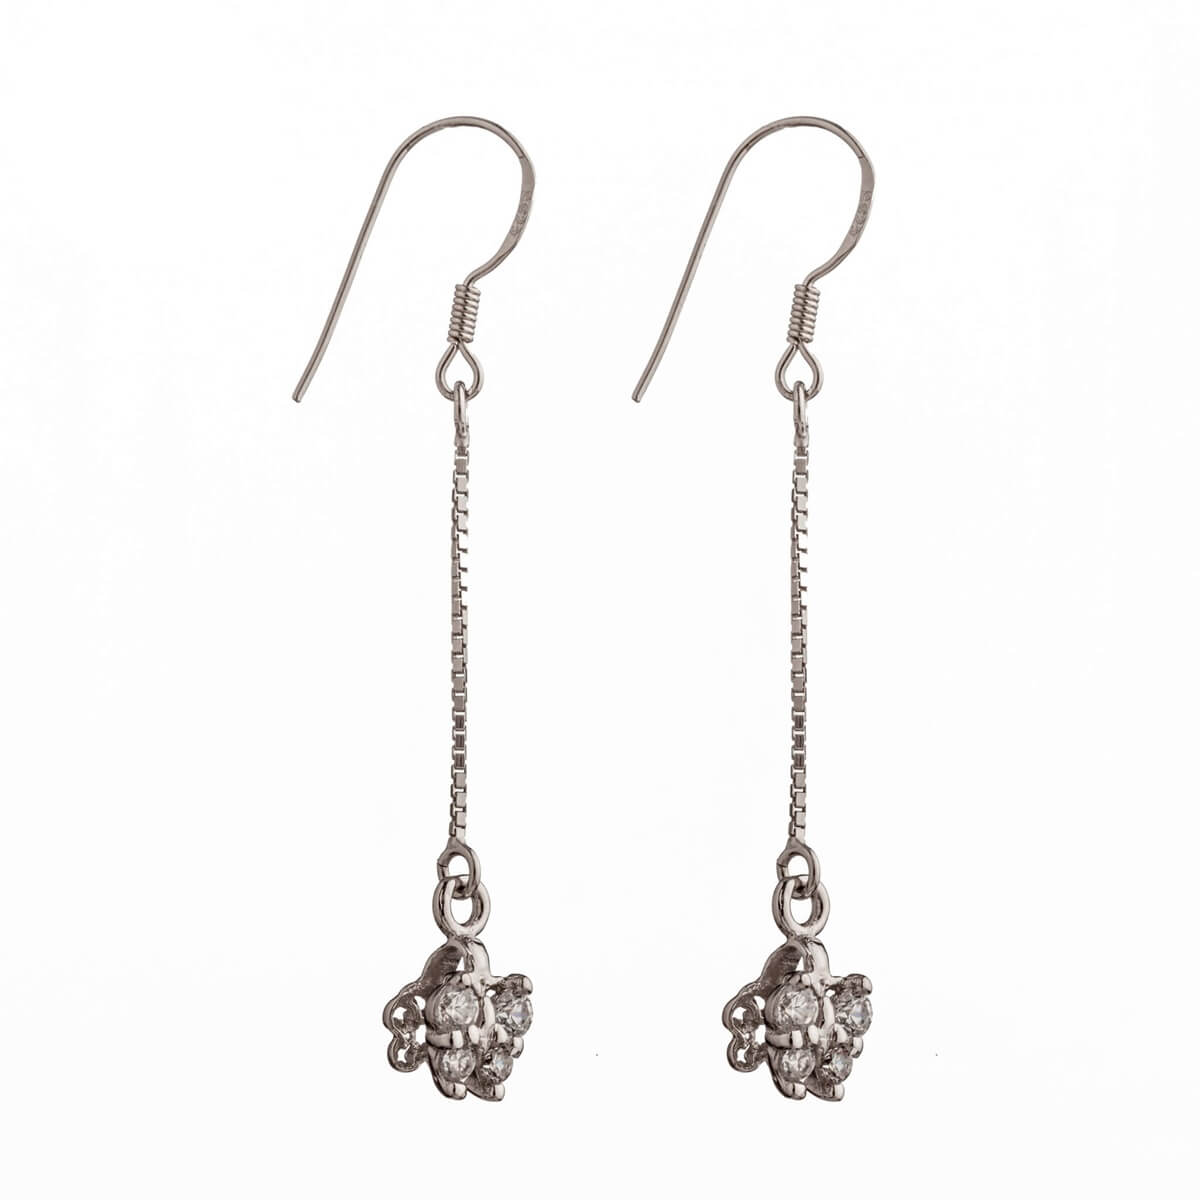 Ear Wires with Cubic Zirconia Inlays, Chain, and Pinch Bail in Sterling Silver 23 Gauge 